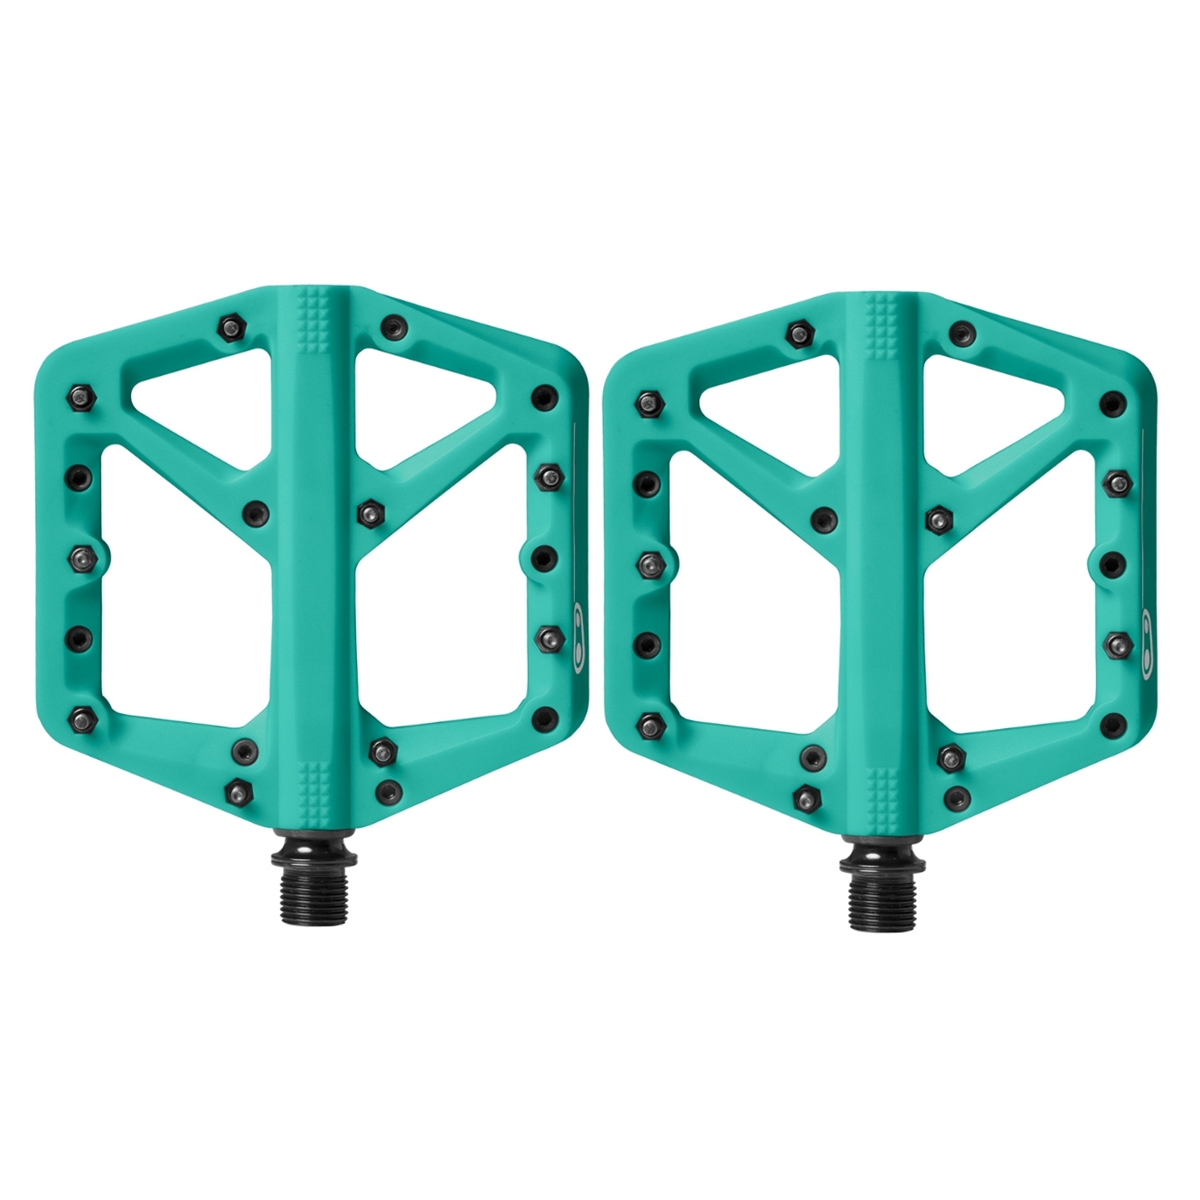 Pair of pedals Stamp 1 Large turquoise